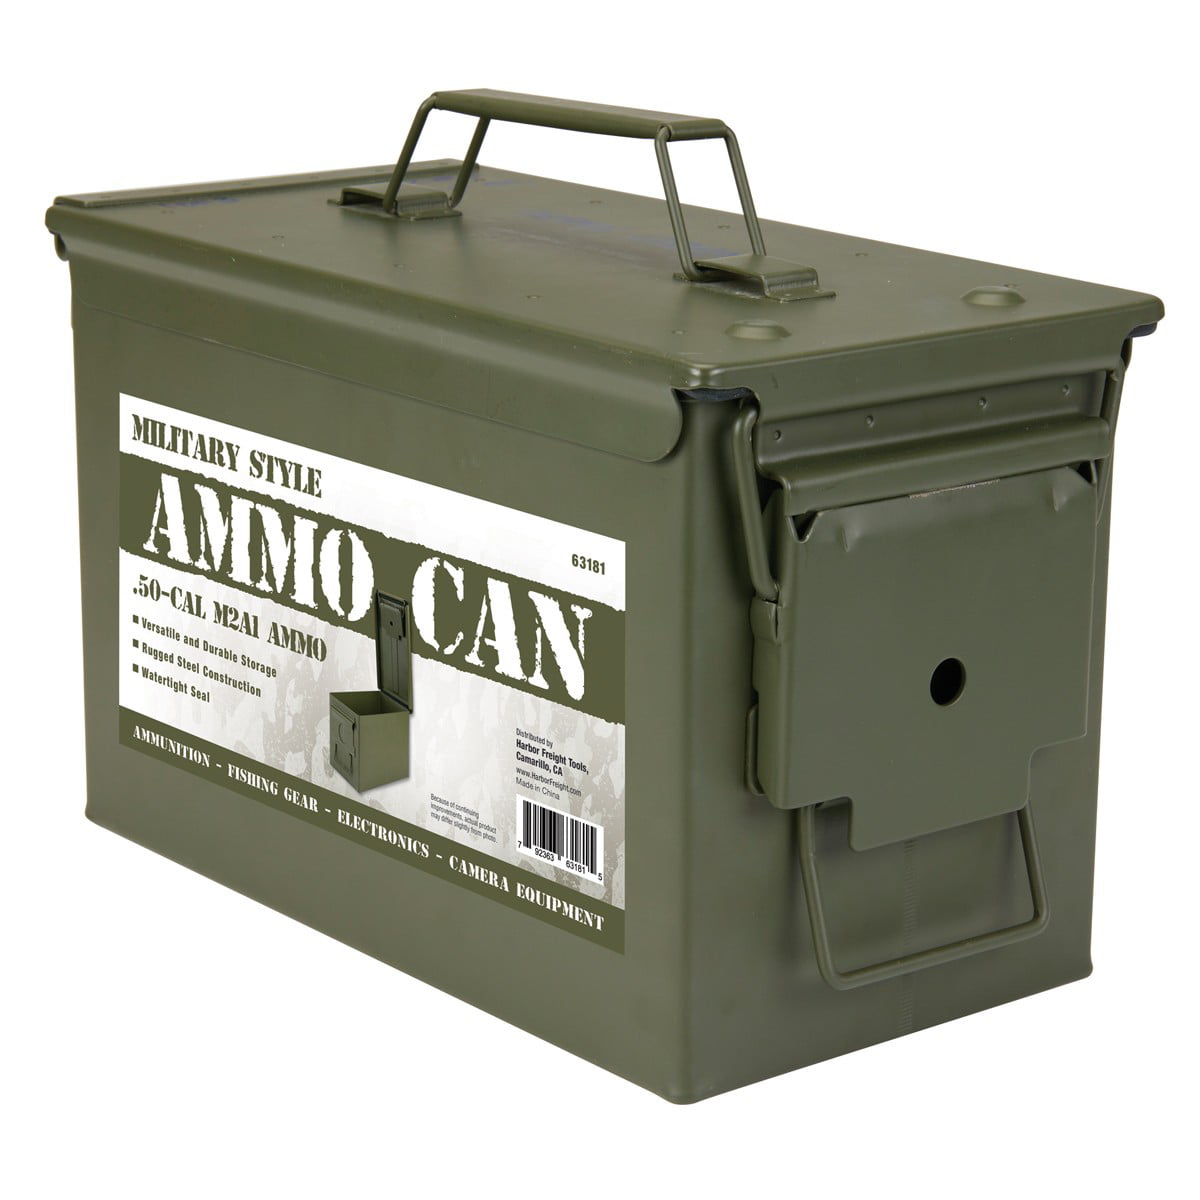 Details about   Heritage Security Products 30 cal 50 Caliber Metal Ammo Cans NEW 30/50 